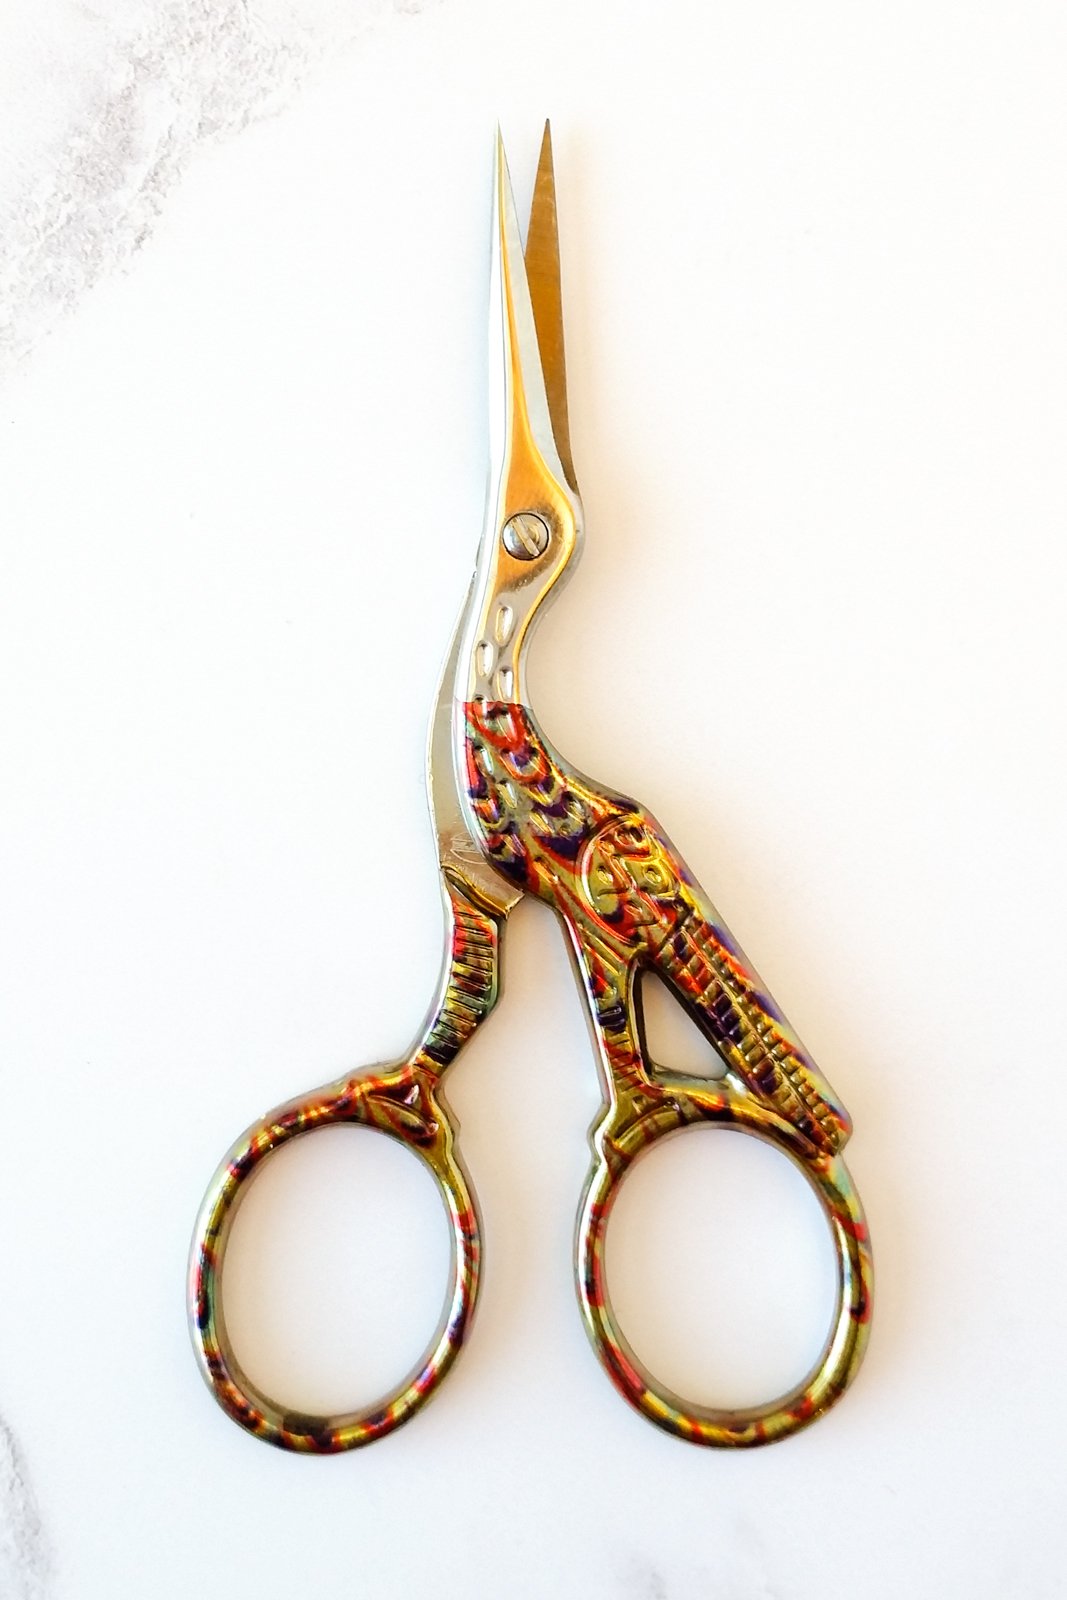 Why you need a good pair of embroidery scissors - Stitched Modern